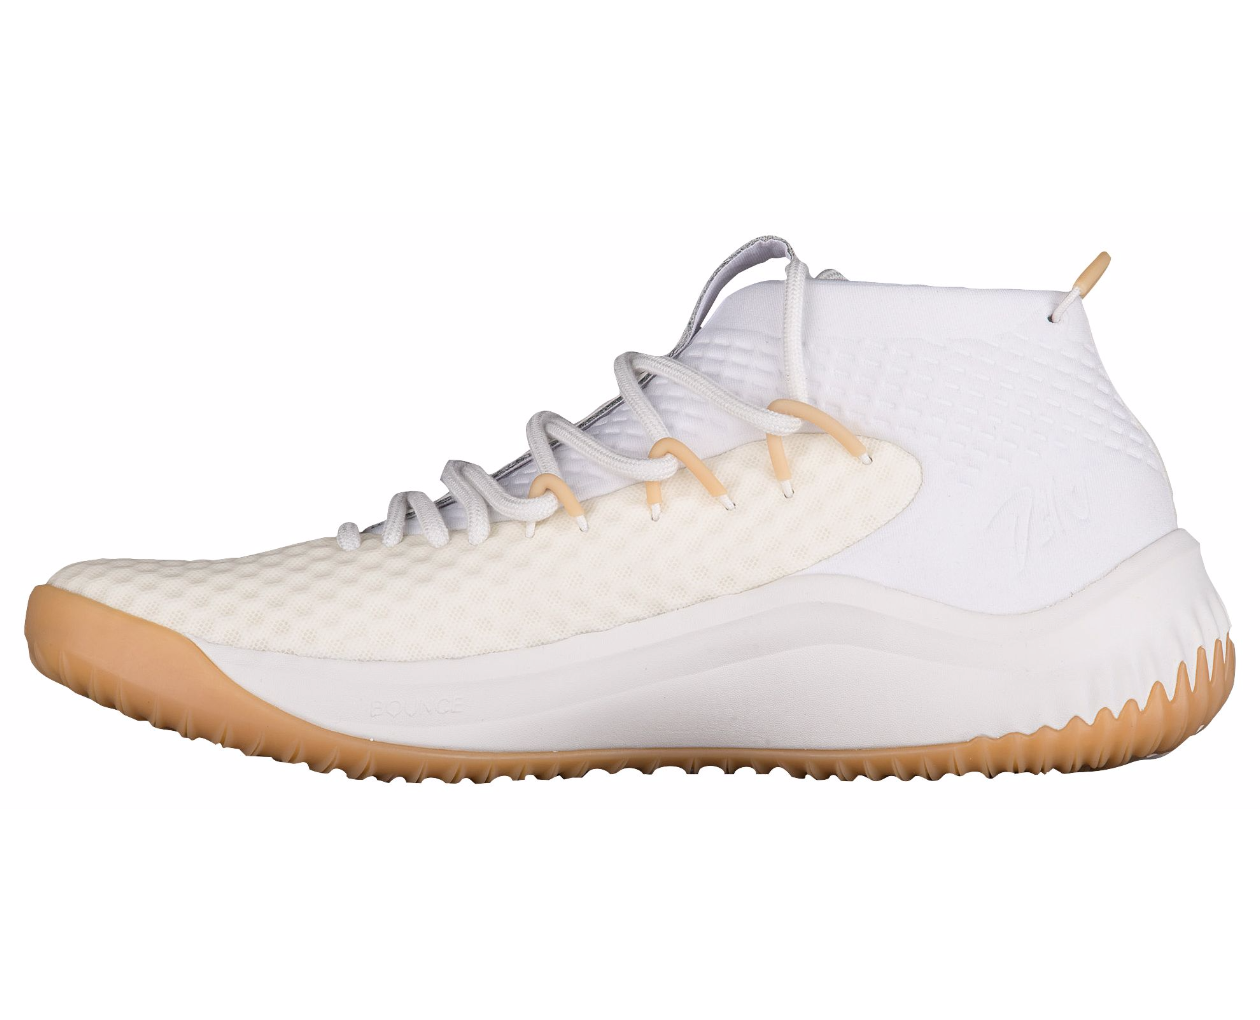 adidas dame 4 white gum 4 - WearTesters